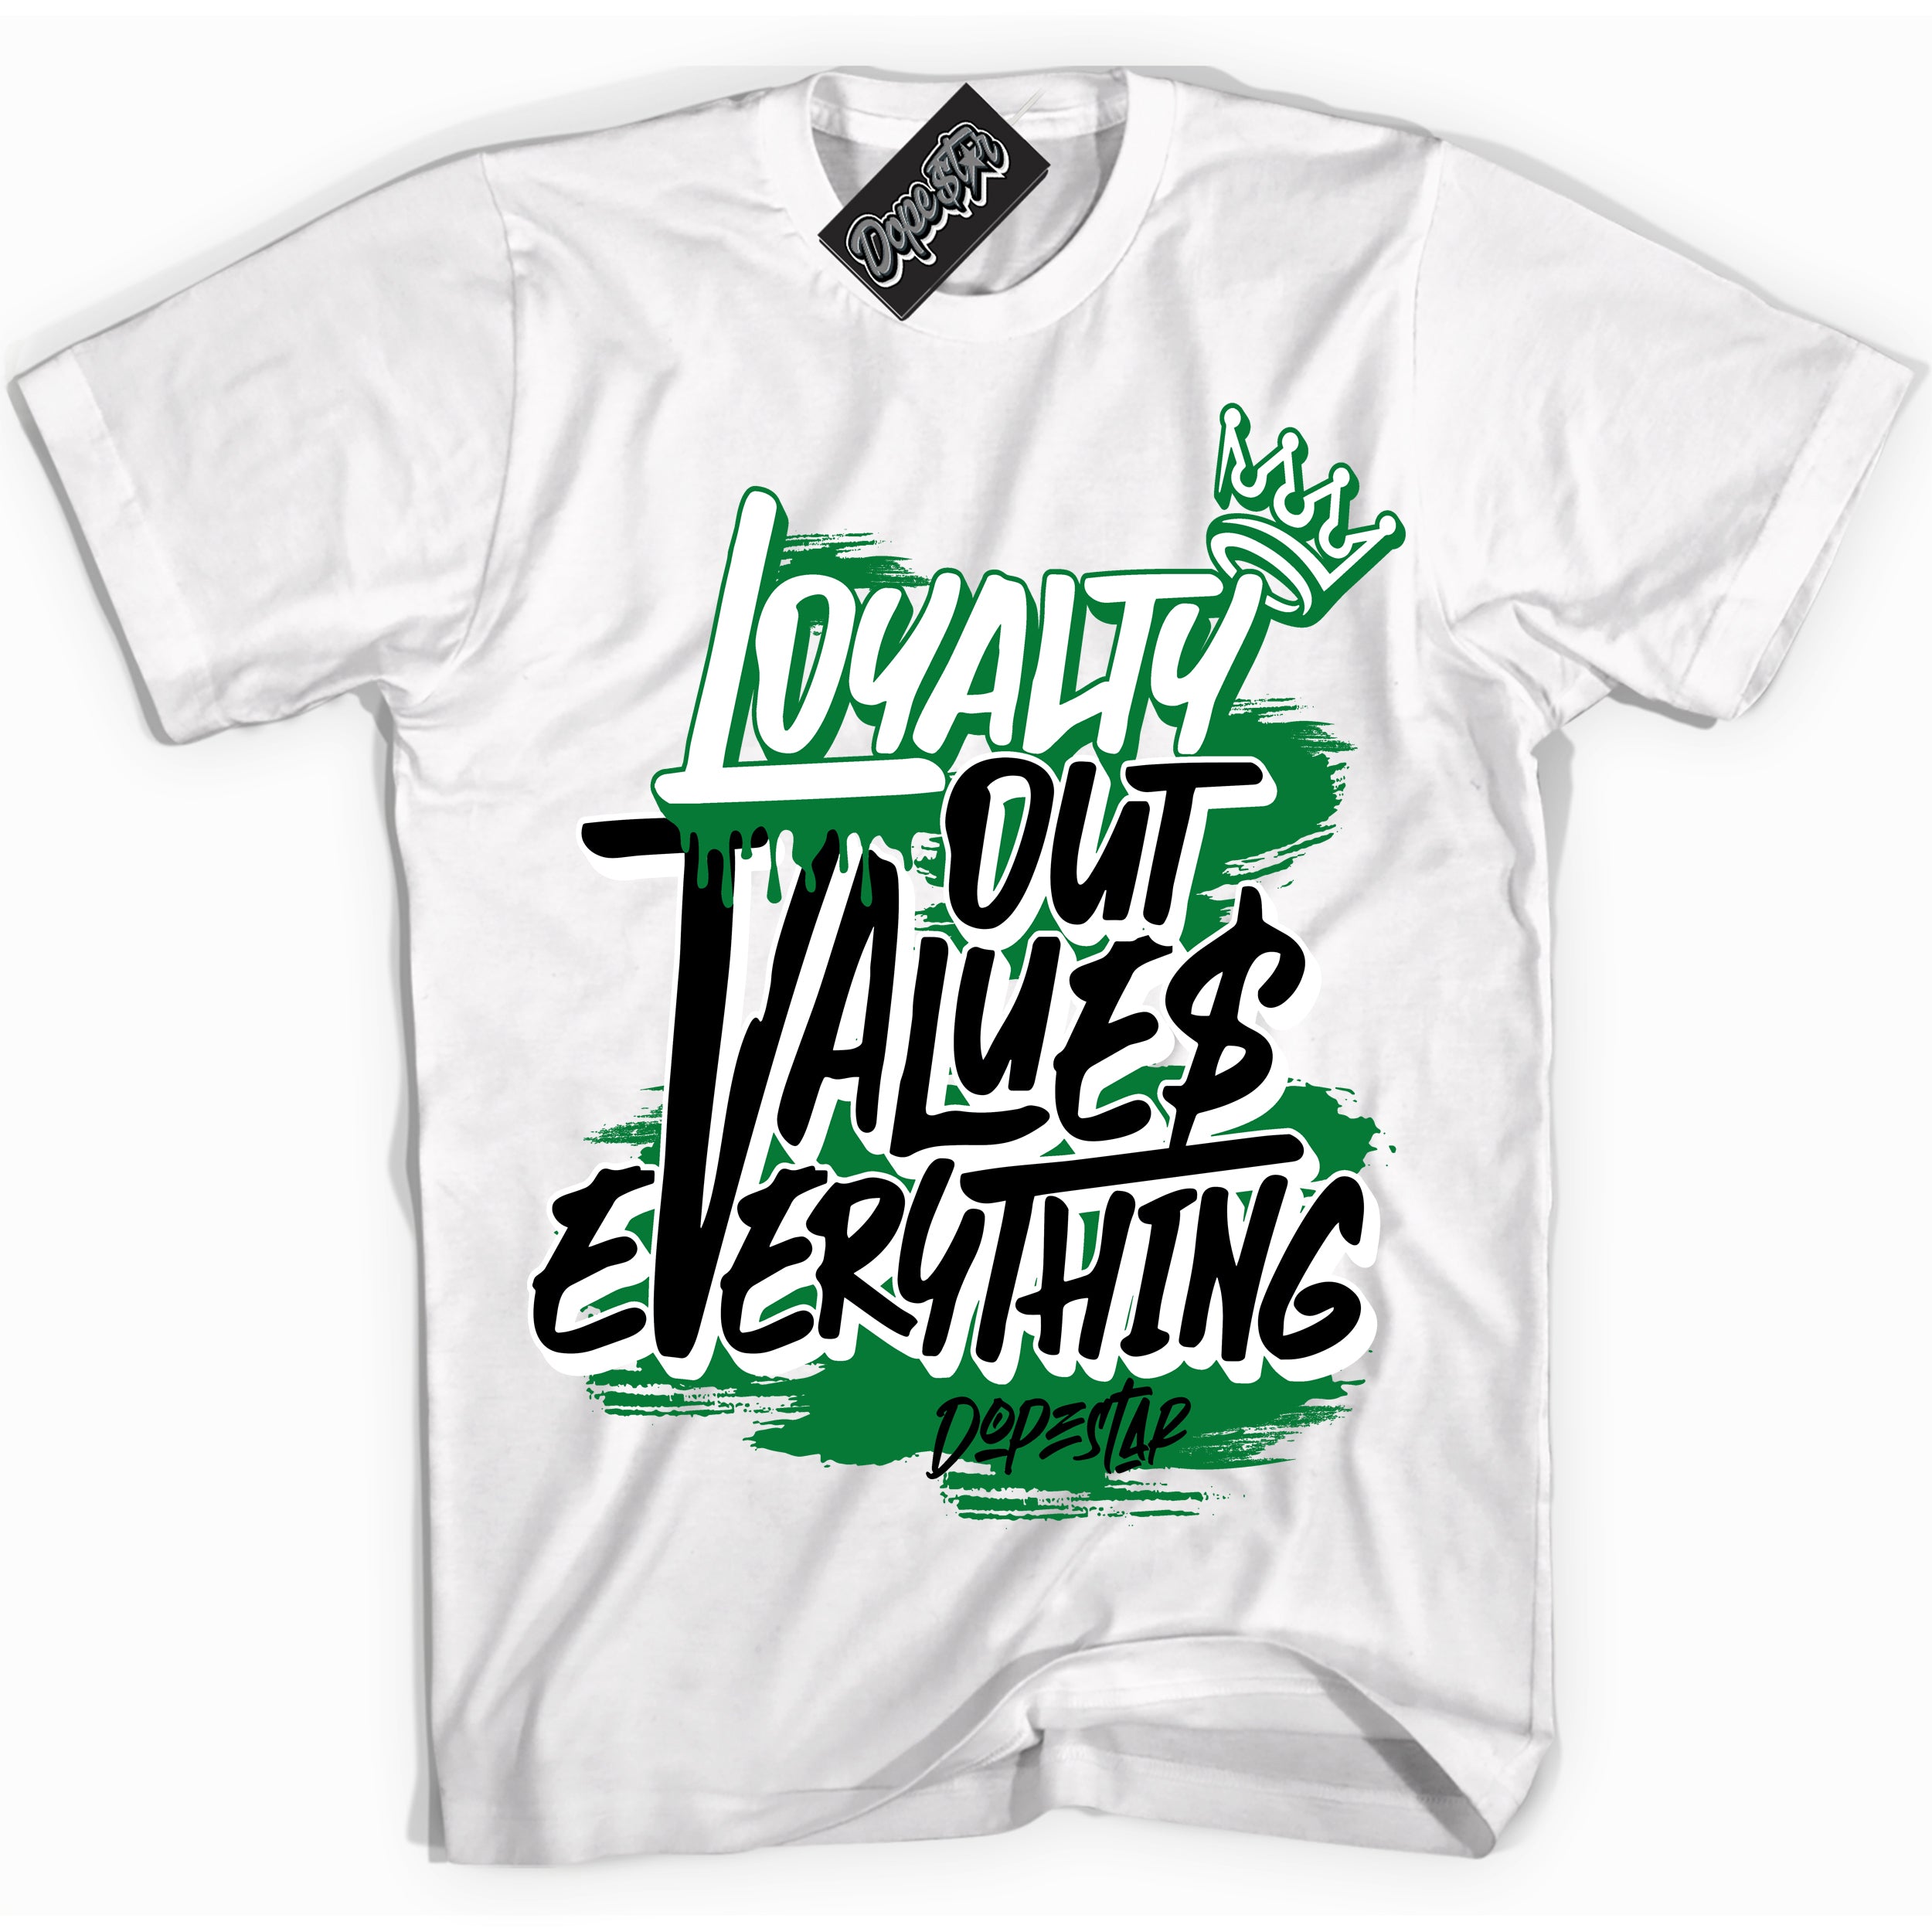 Cool White Shirt with “ Loyalty Out Values Everything” design that perfectly matches Rings Lucky Green 6s Sneakers.